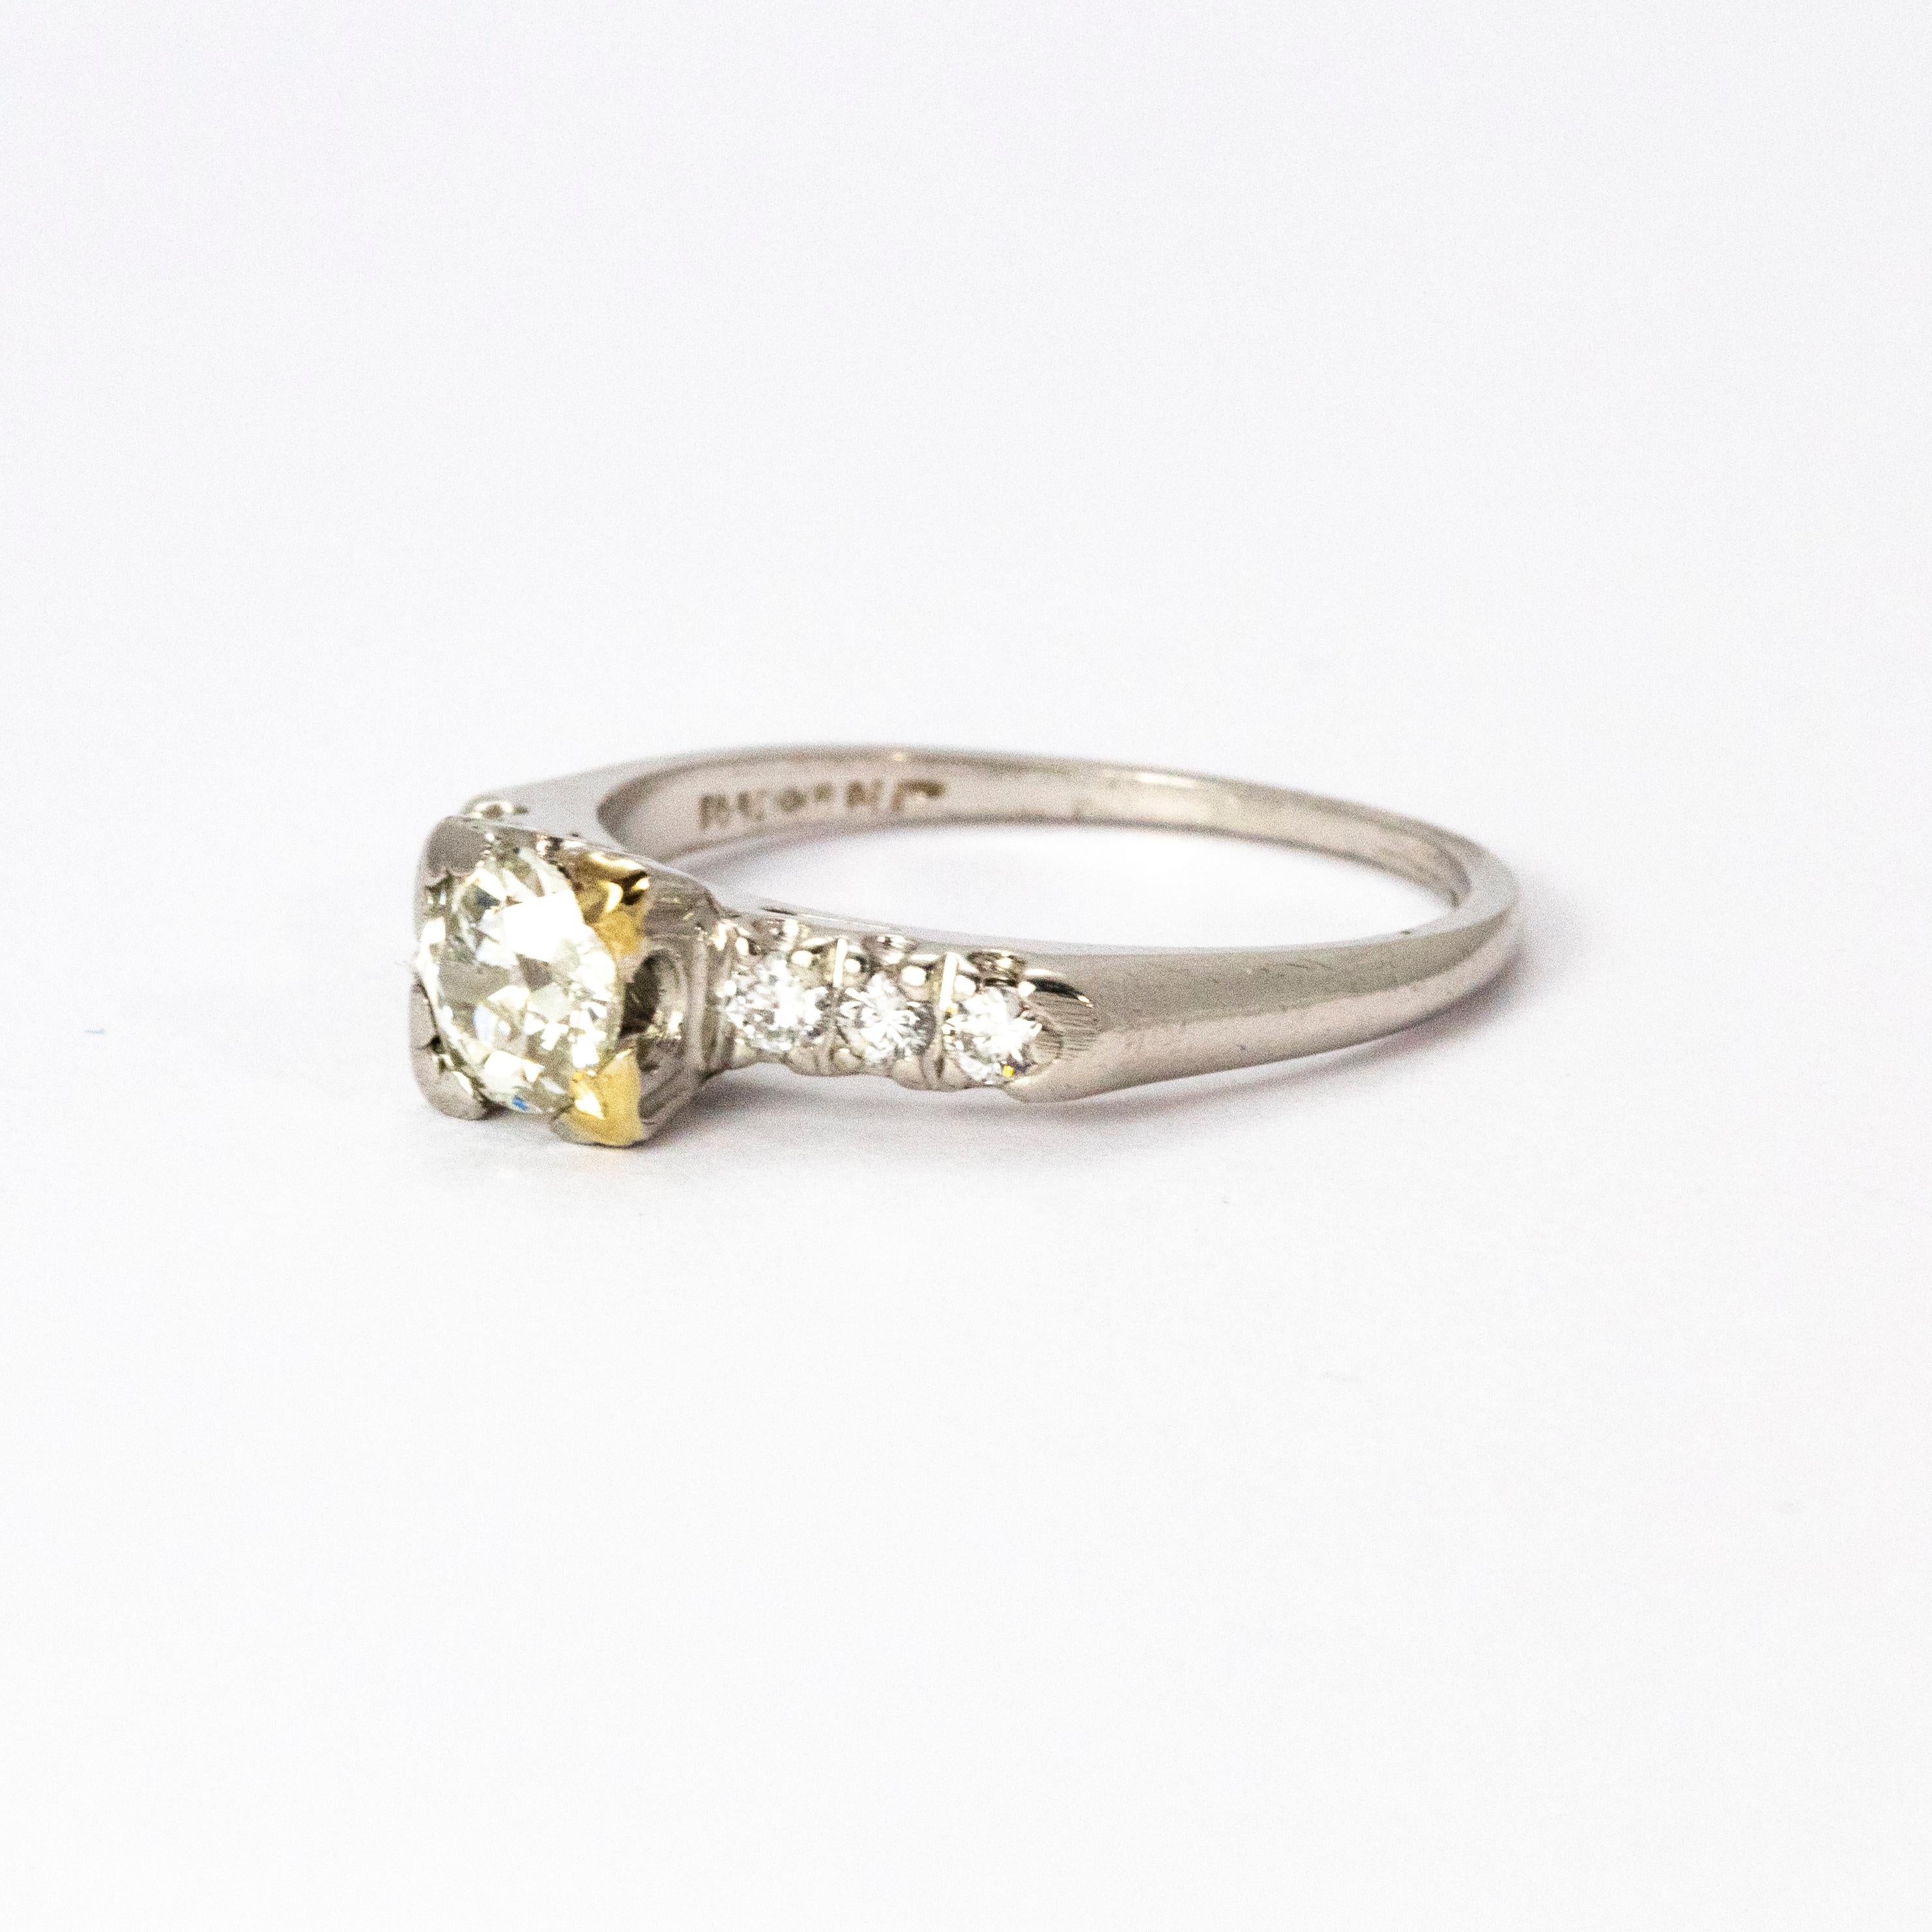 A stunning vintage diamond solitaire ring. The beautiful central old European cut diamond measures 80 points , H colour and VS2 clarity. The shoulders are each set with a trio of diamonds. Modelled in platinum.

Ring size: O 1/7 or 7.75